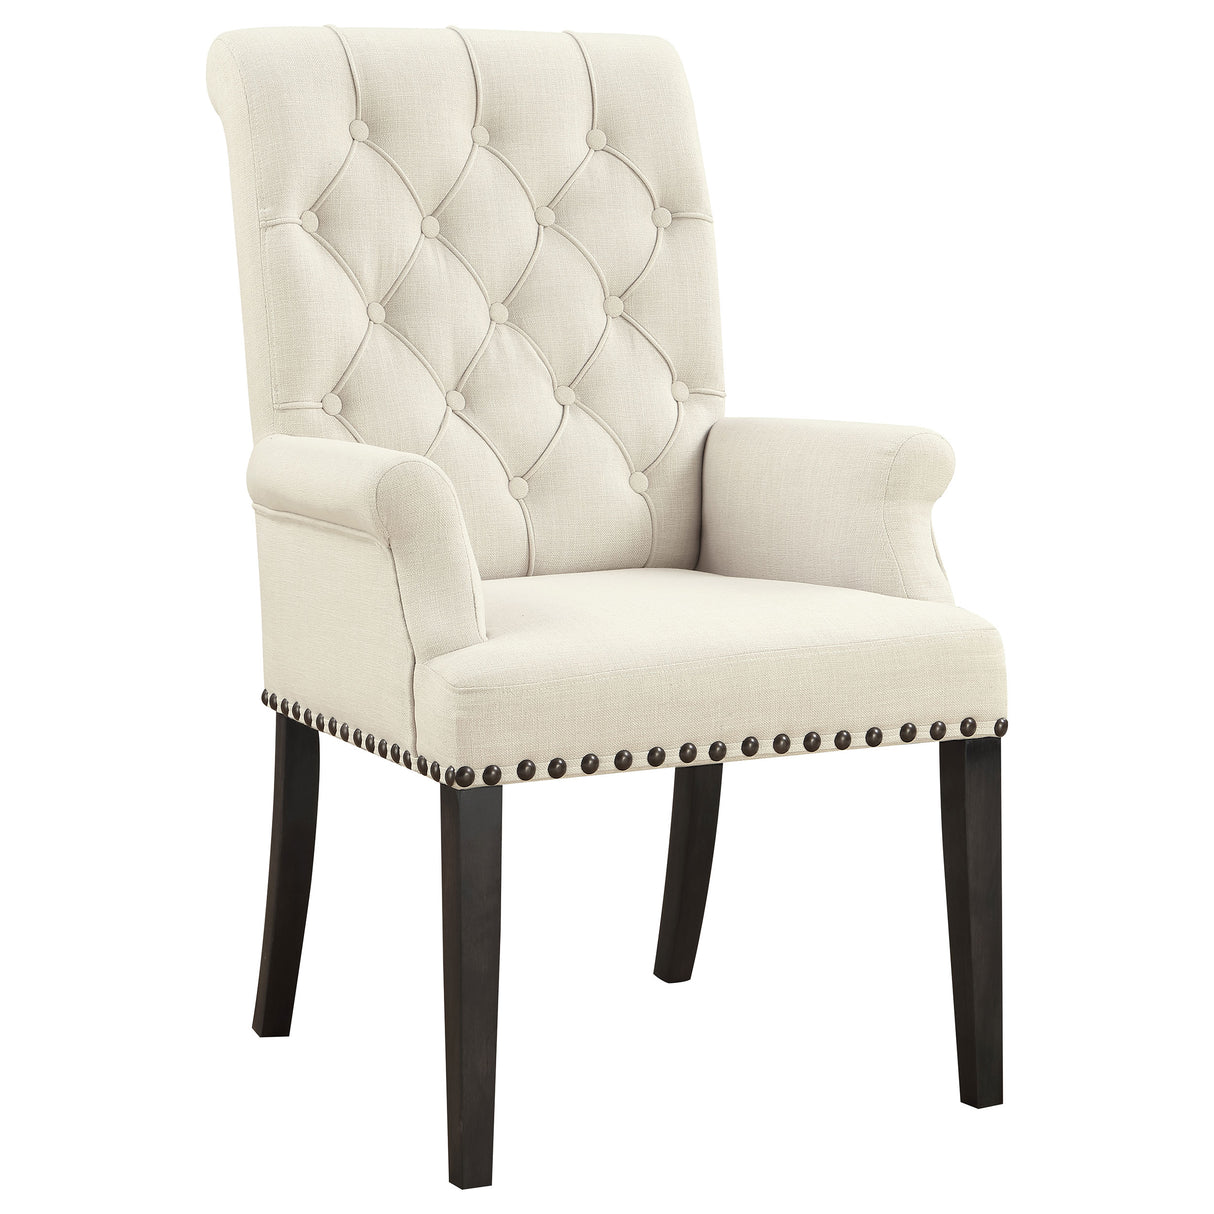 Arm Chair - Alana Upholstered Arm Chair Beige and Smokey Black